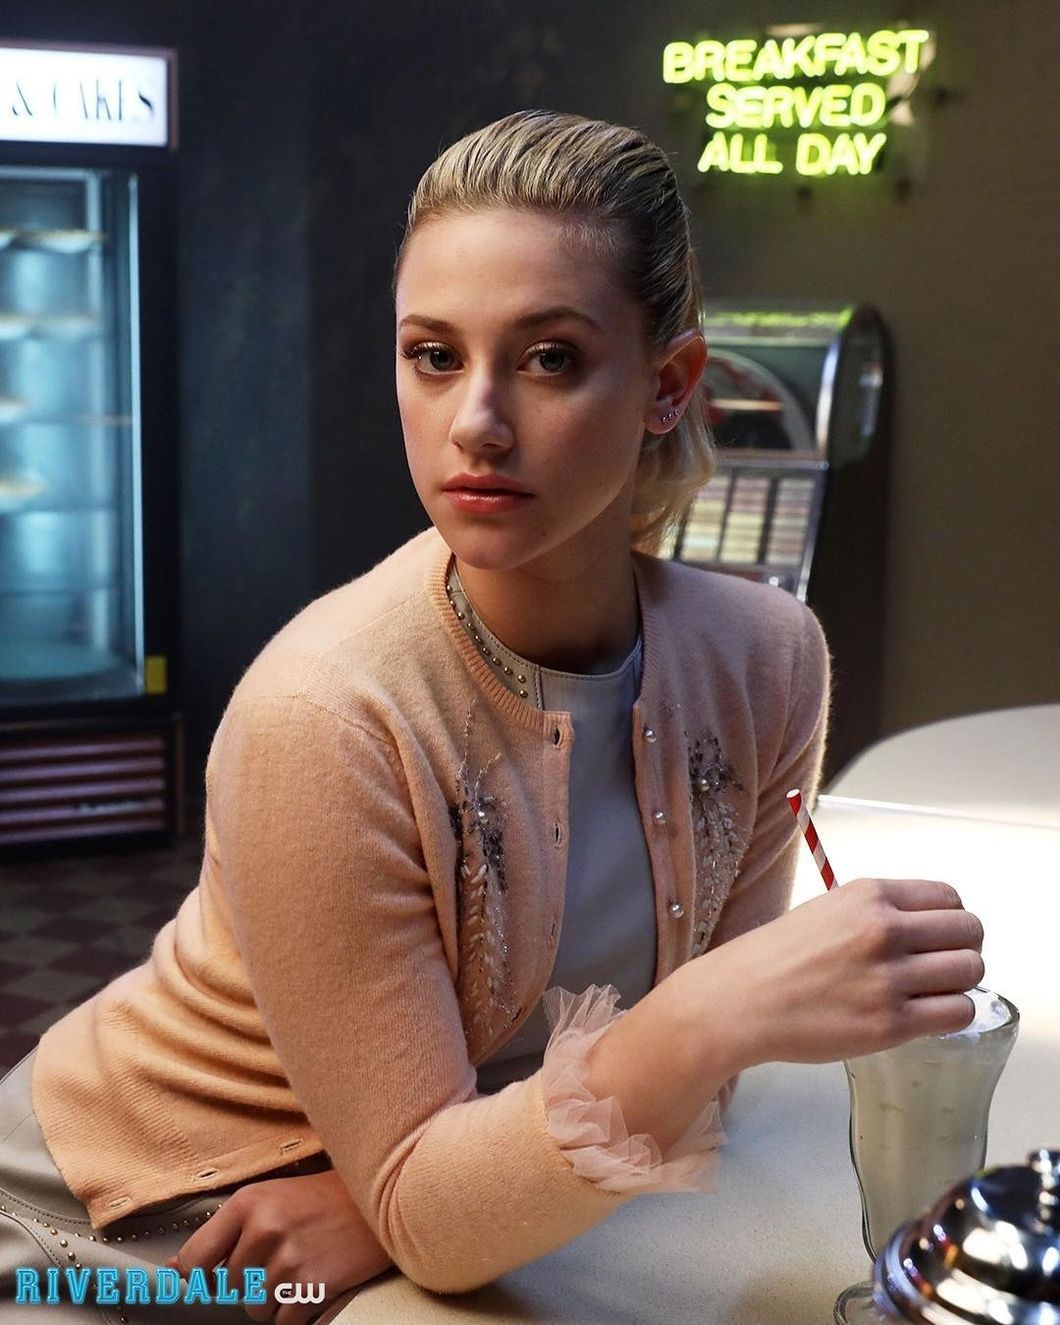 I Just Finished 'Riverdale' Season 2 and We Are All Betty Cooper